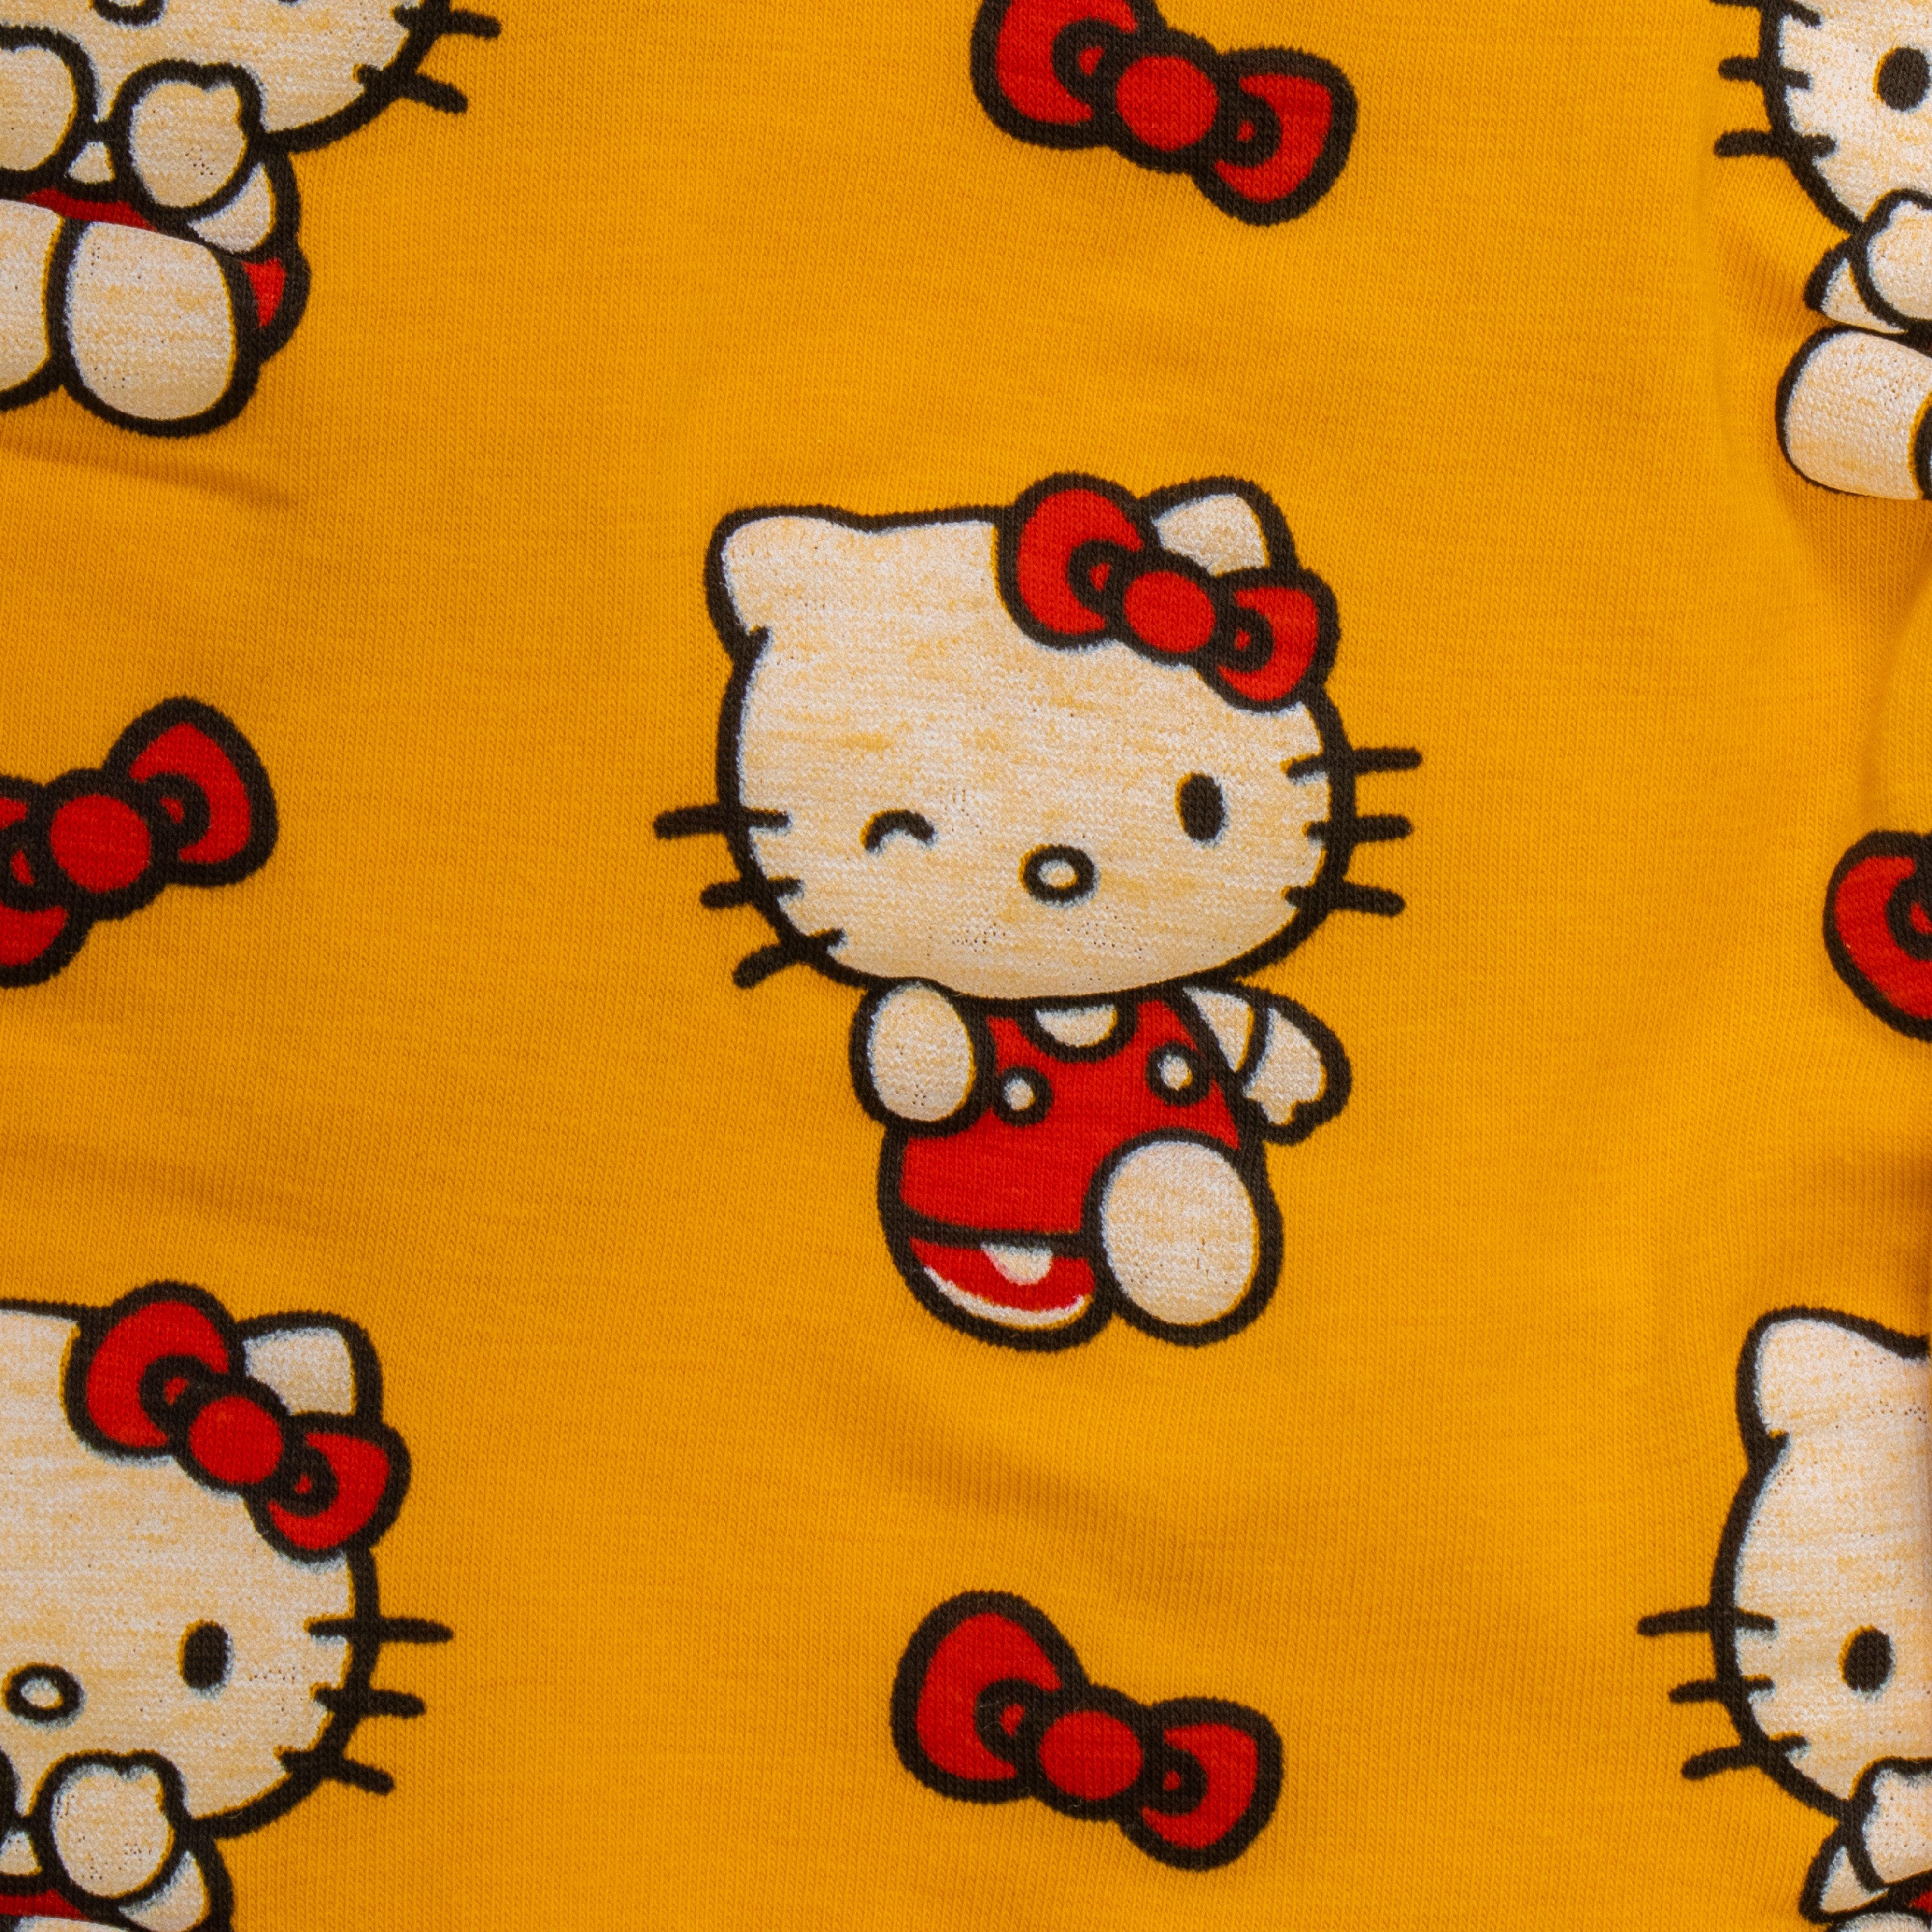 Hello Kitty Leggings Red & Yellow AOP Combo - Juscubs